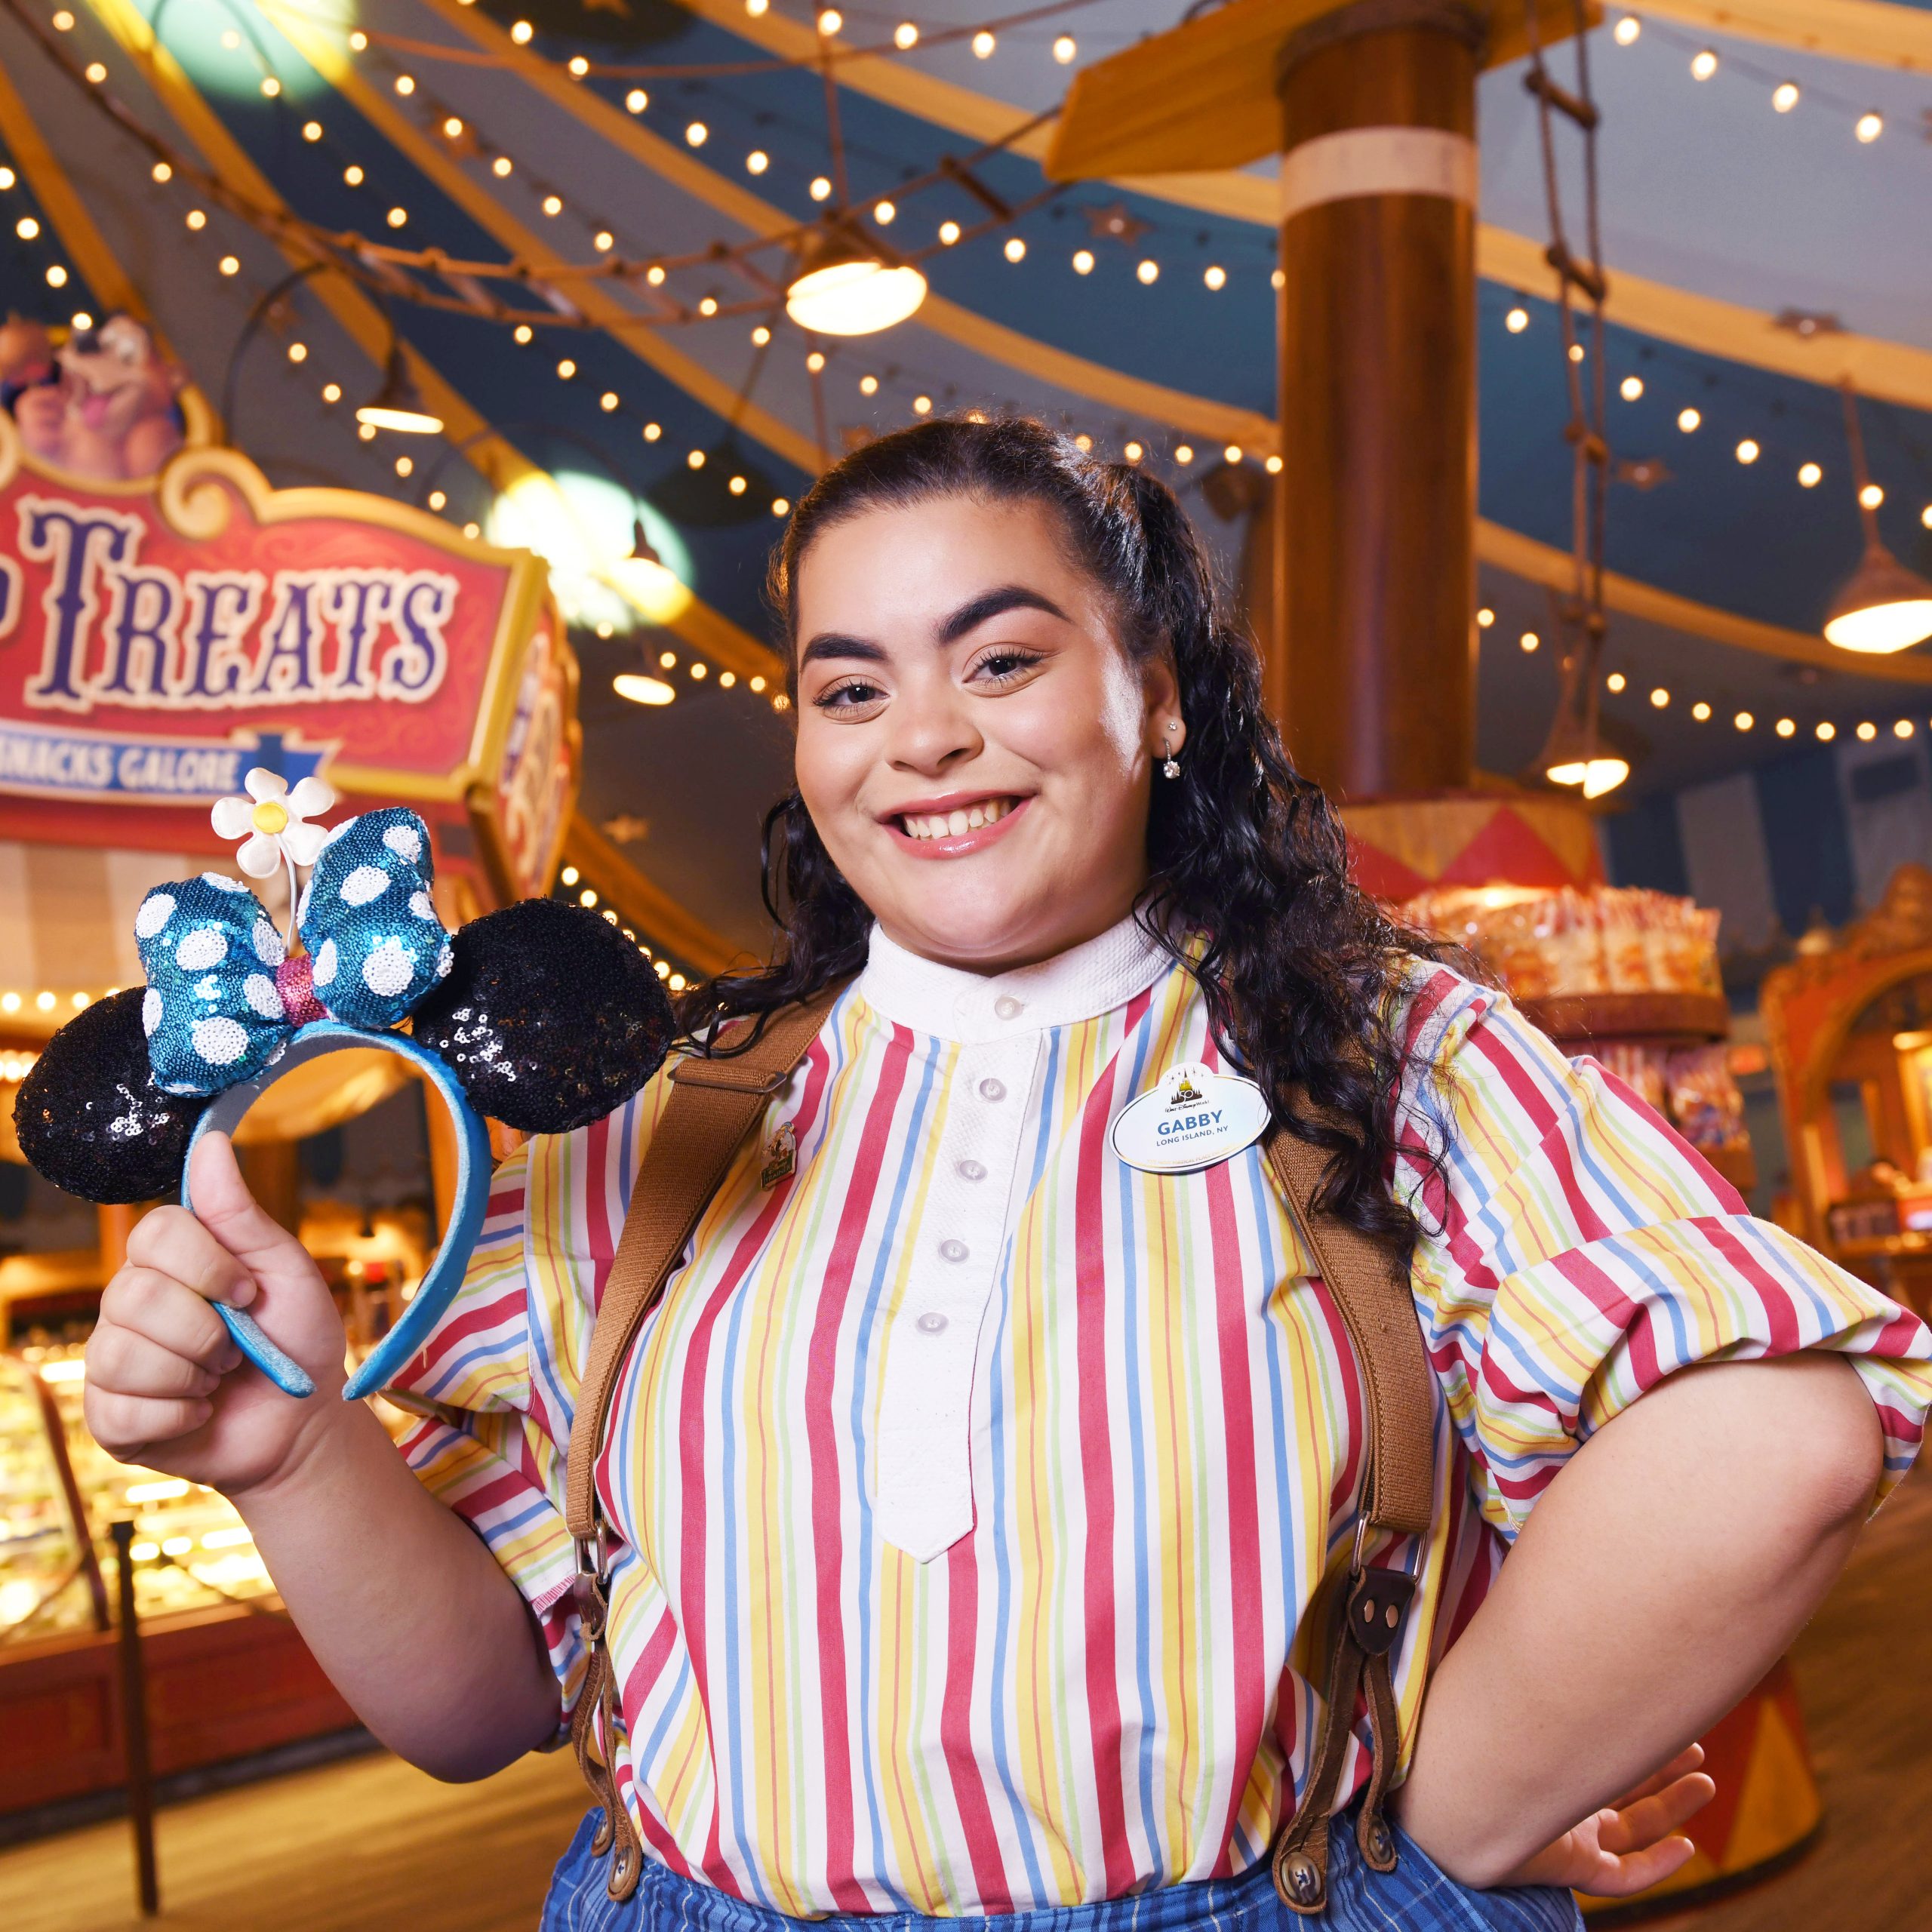 A female Disney College Program participant with long dark hair smiling while holding Minnie Mouse ears in her right hand